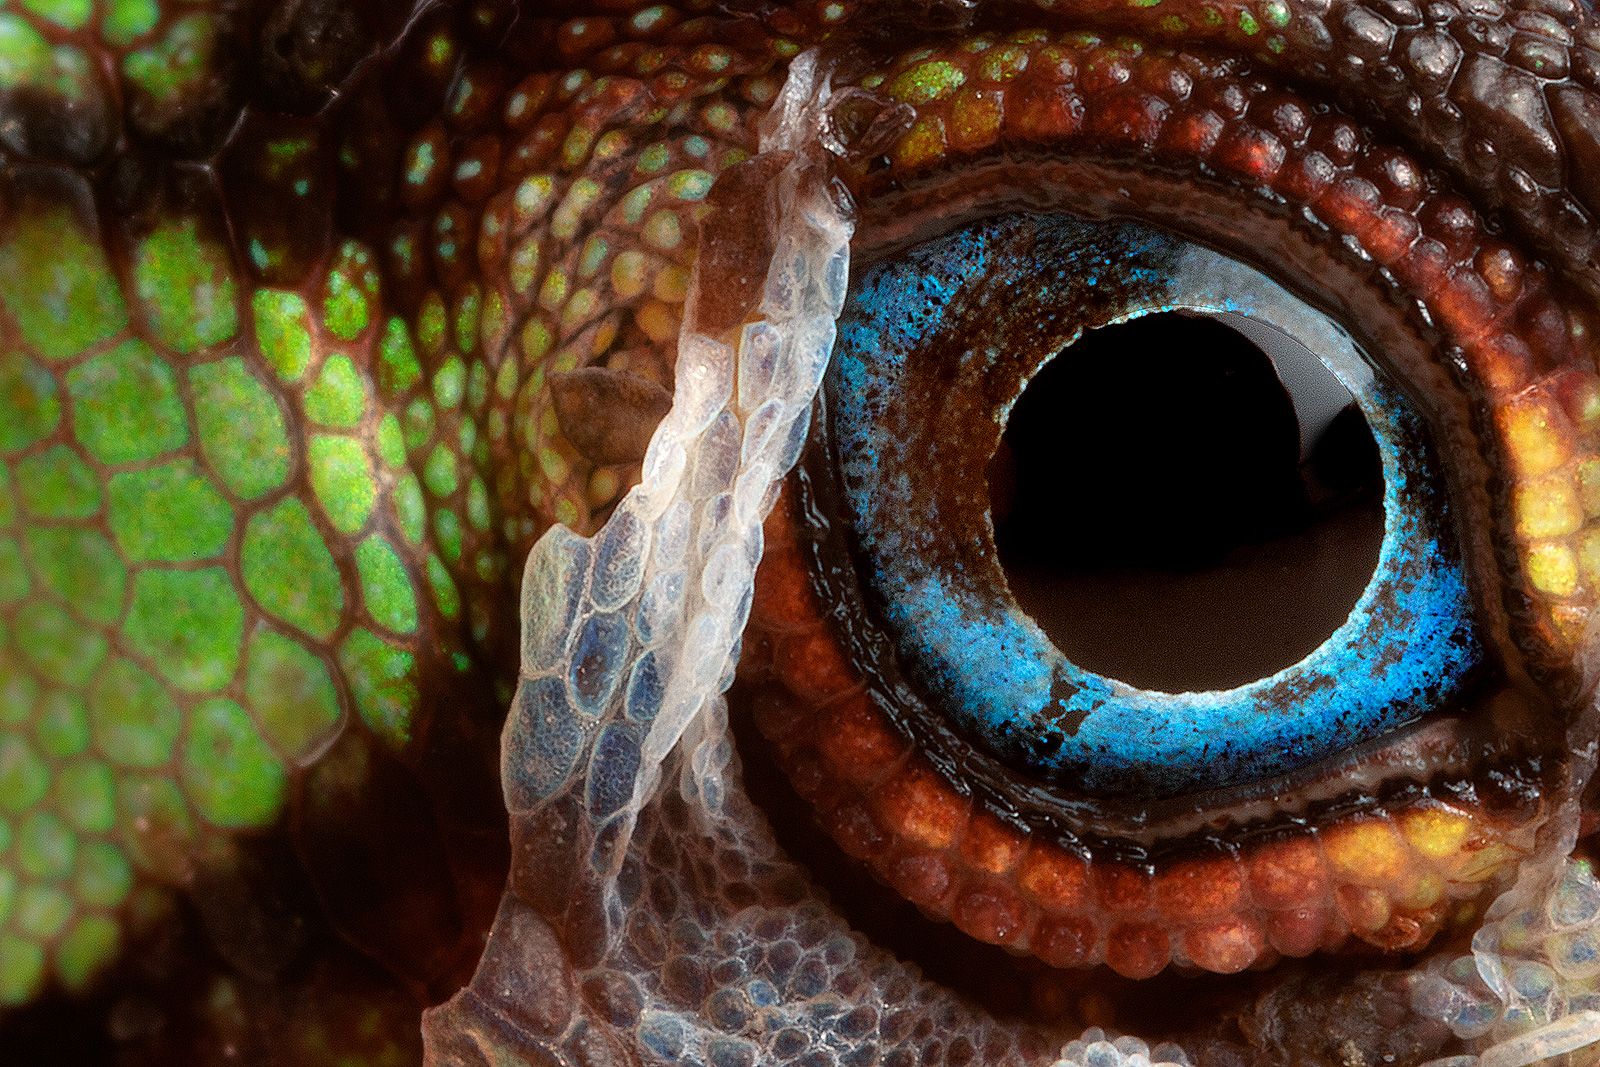 Extreme macro photo of the eye of a Banded Tree-Anole (Anolis transversalis), created using the Canon MP-E 65mm Macro Lens